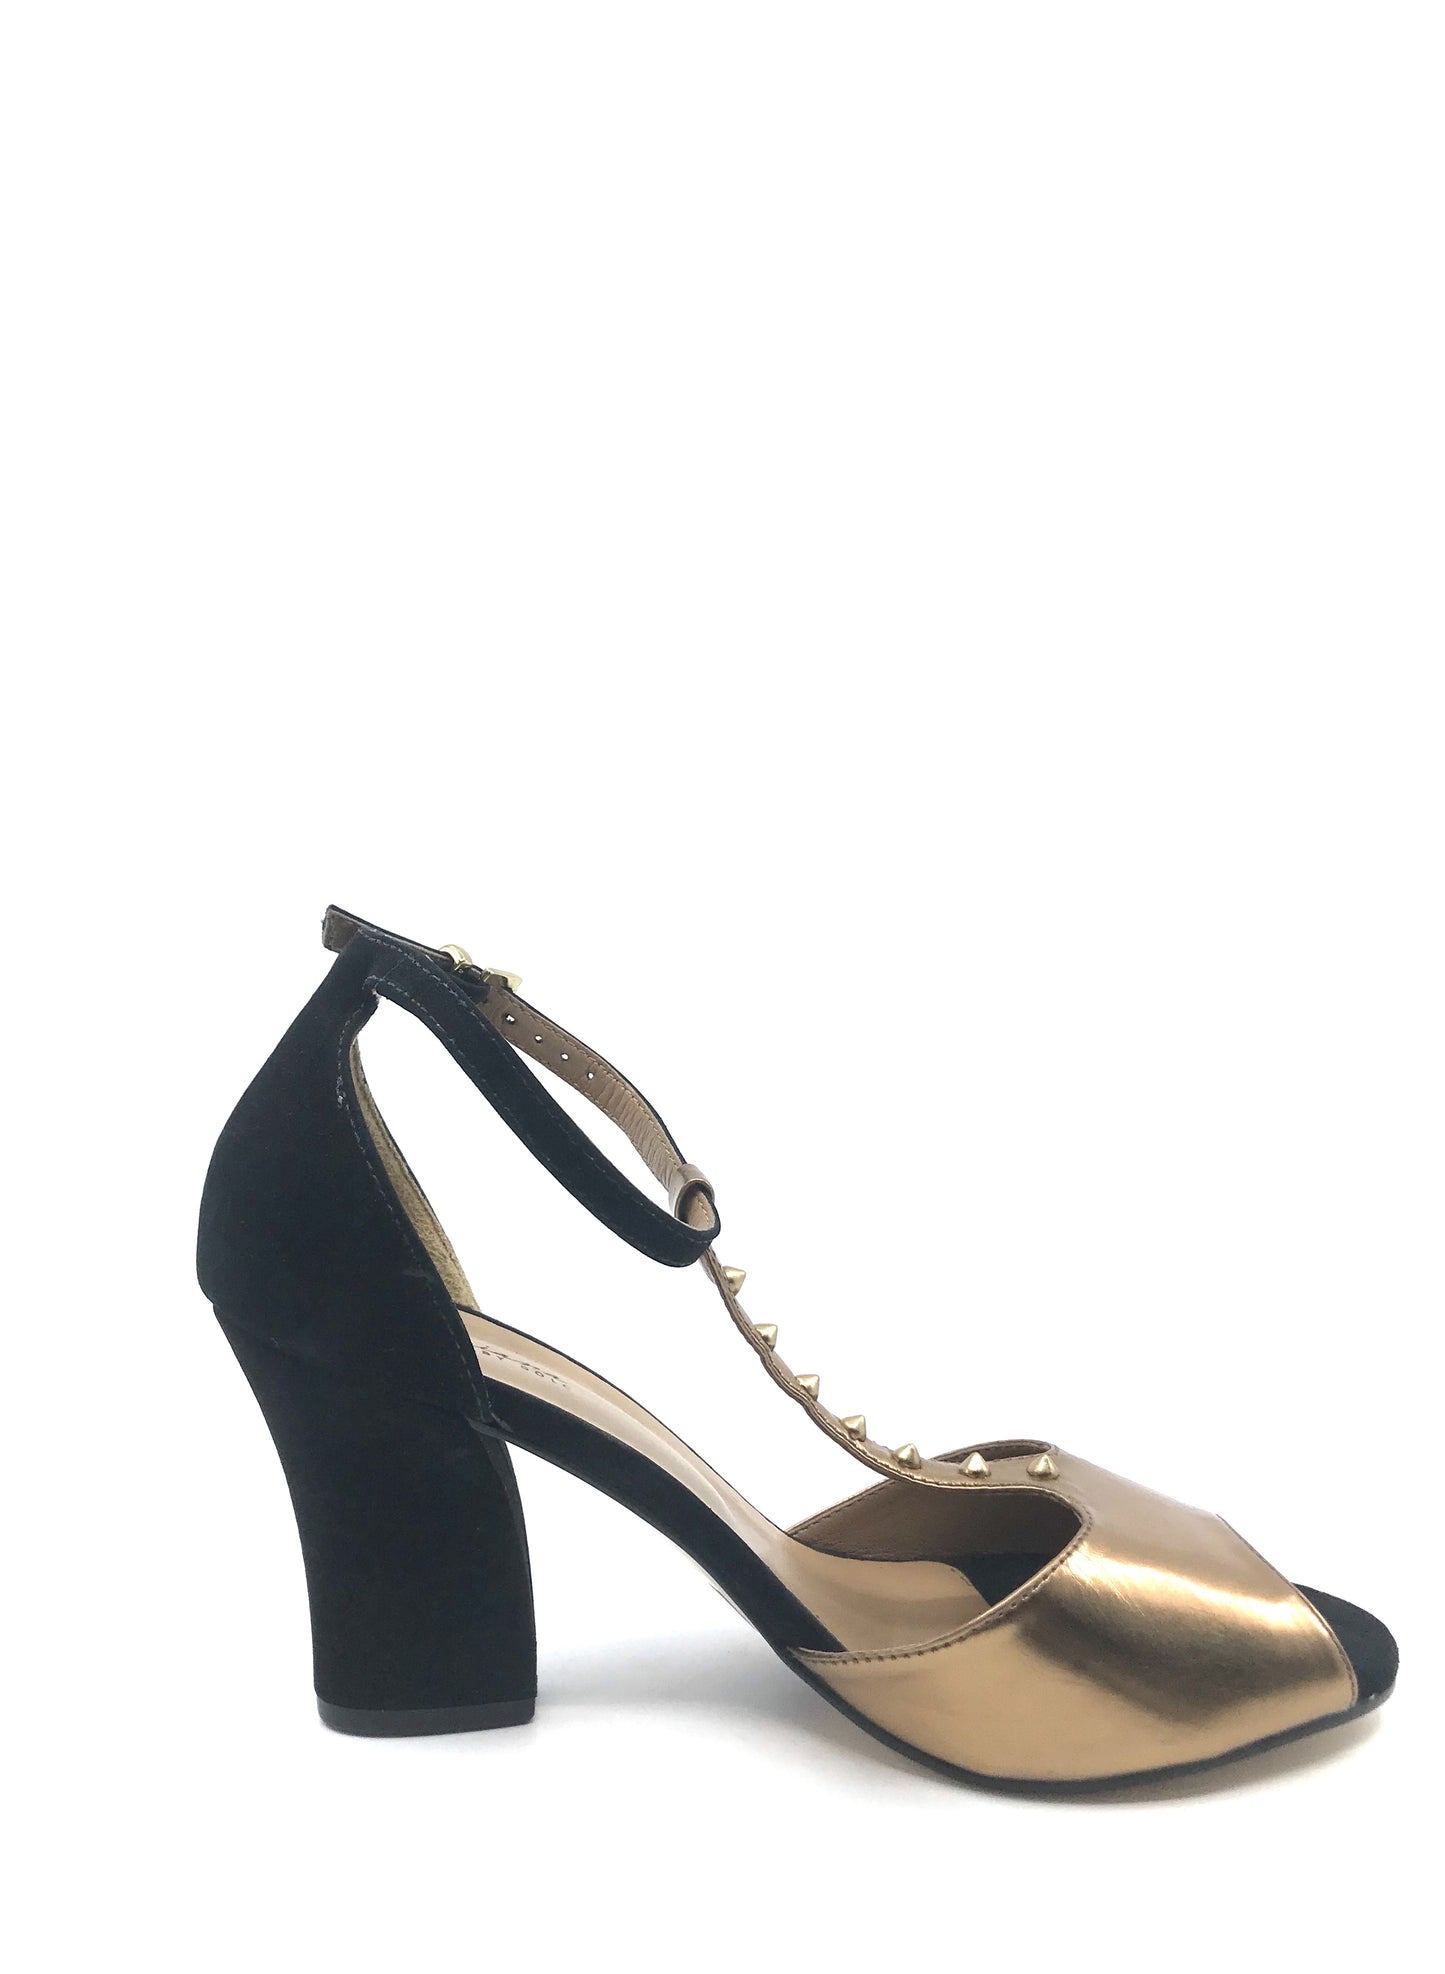 Mariana by Golc Women's Devana Gold Metallic and Black Suede Pump